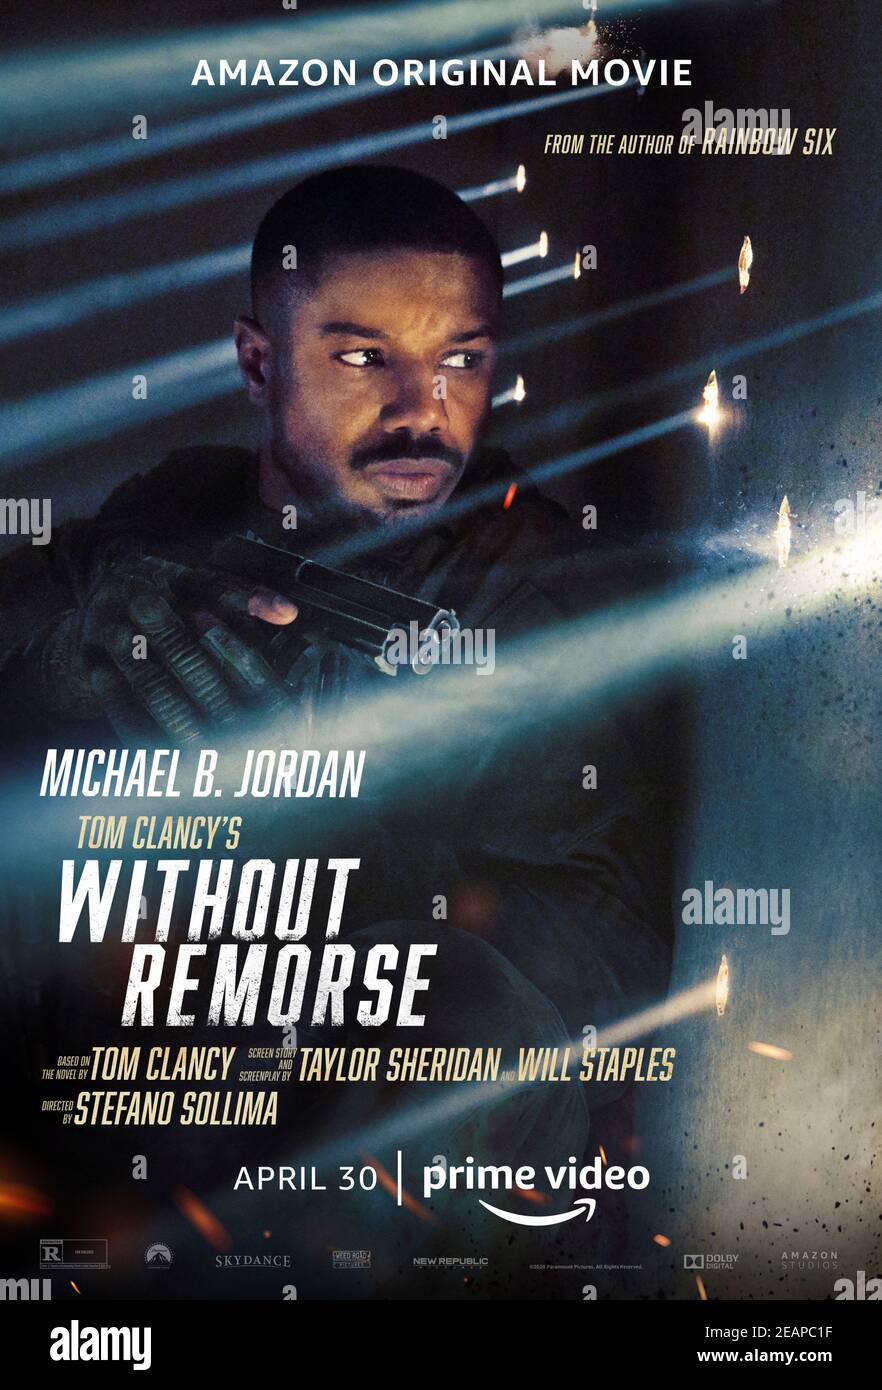 Without Remorse (2021) directed by Stefano Sollima and starring Michael B. Jordan, Jodie Turner-Smith and Jamie Bell. Adaptation of Tom Clancy's book about a Navy SEAL who seeks to avenge his wife's murder only to uncover a larger conspiracy. Stock Photo